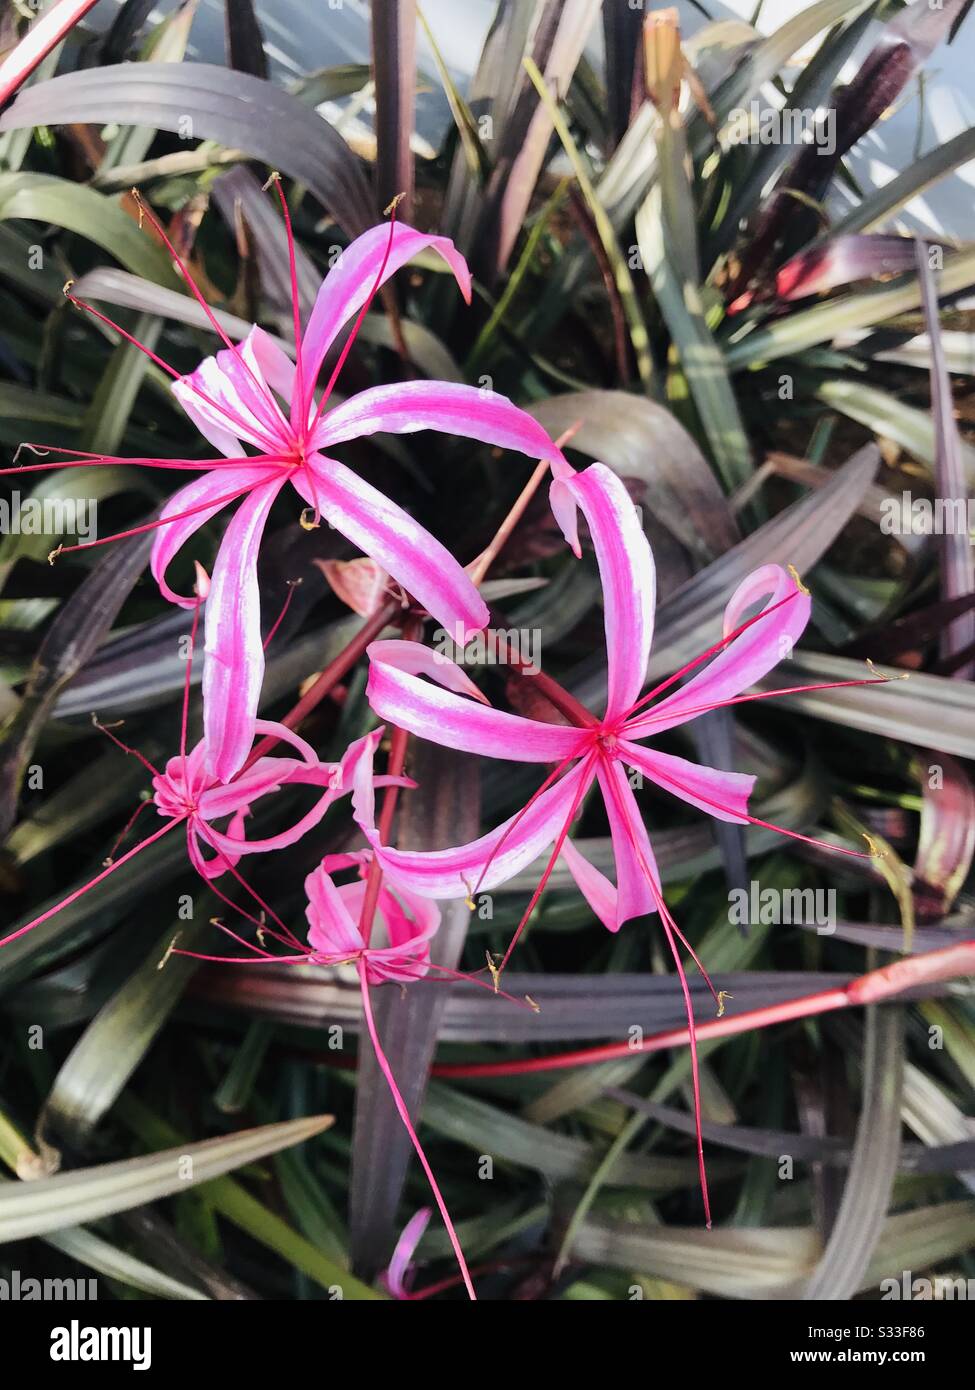 Restaurant garden in india near Pollachi found  giant spider lily aka Crinum amabile ,pink star like flower , bunch of pink flowers in single stalk, pink lily-Crinum Lily, Stock Photo